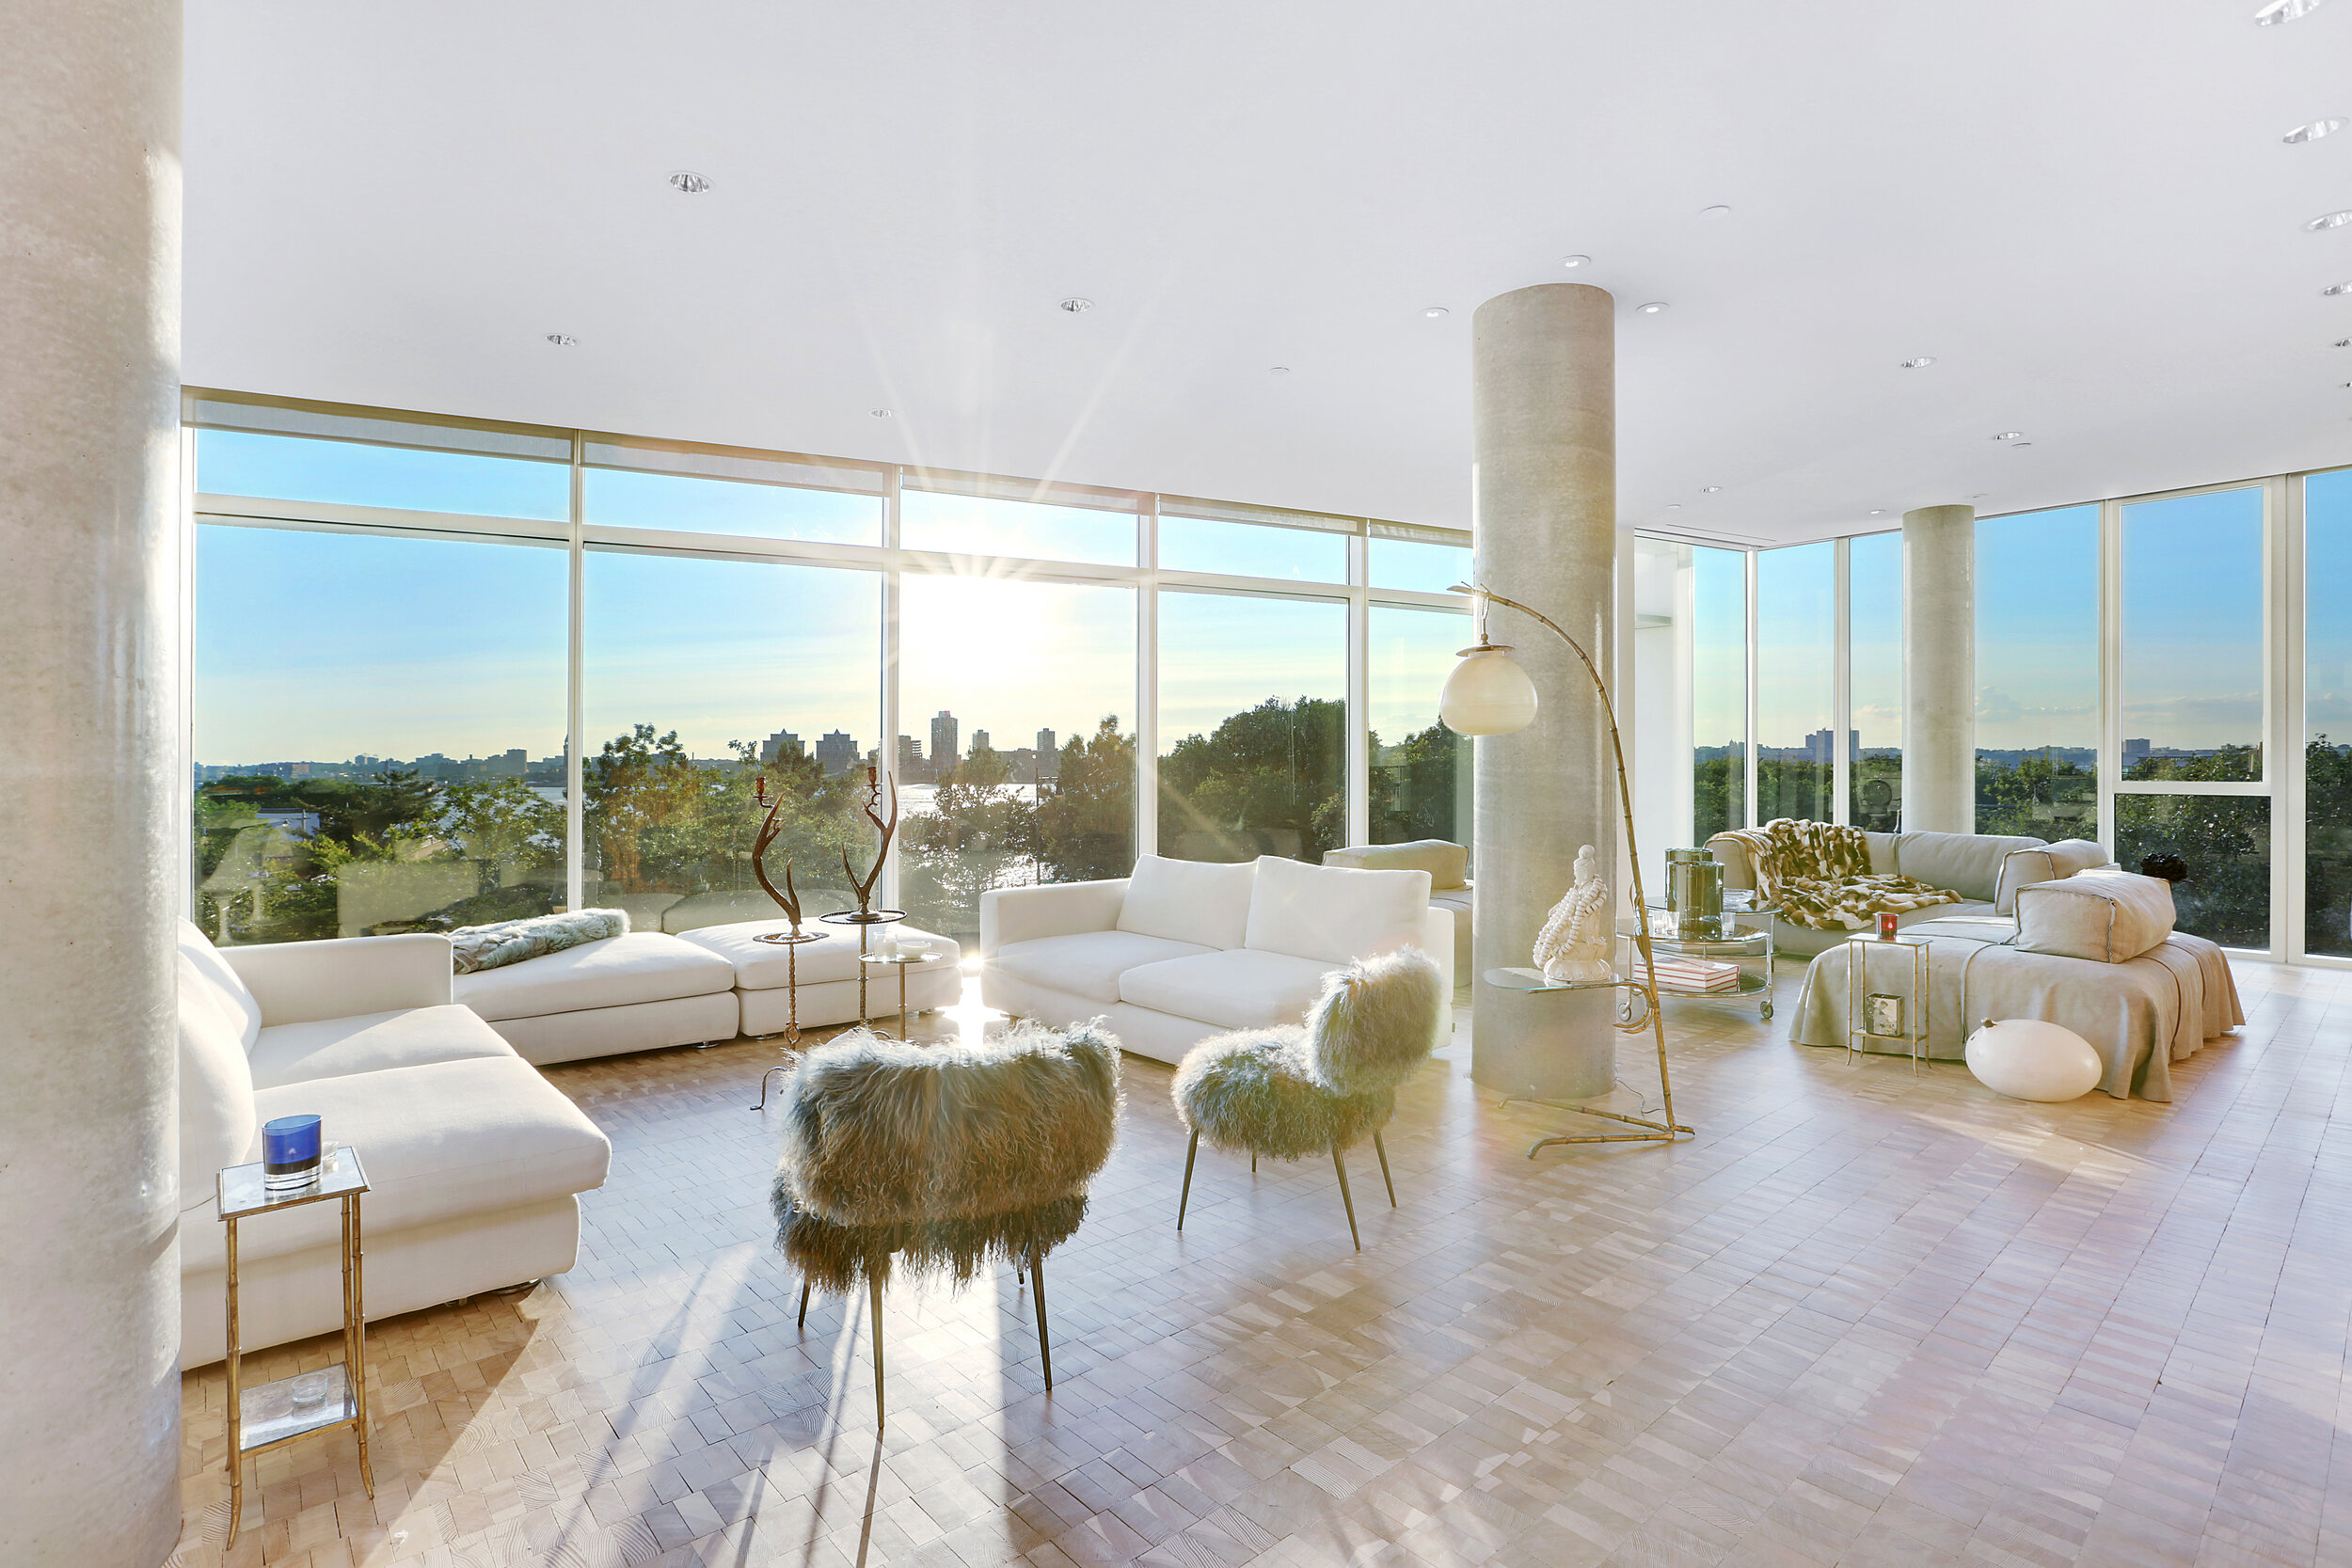  With a private elevator landing, this 3,700 square foot private floor offers a rare opportunity to own and live in this unique building. There are 10’ floor to ceiling windows and sweeping iconic views of the Hudson River and the city skyline. 